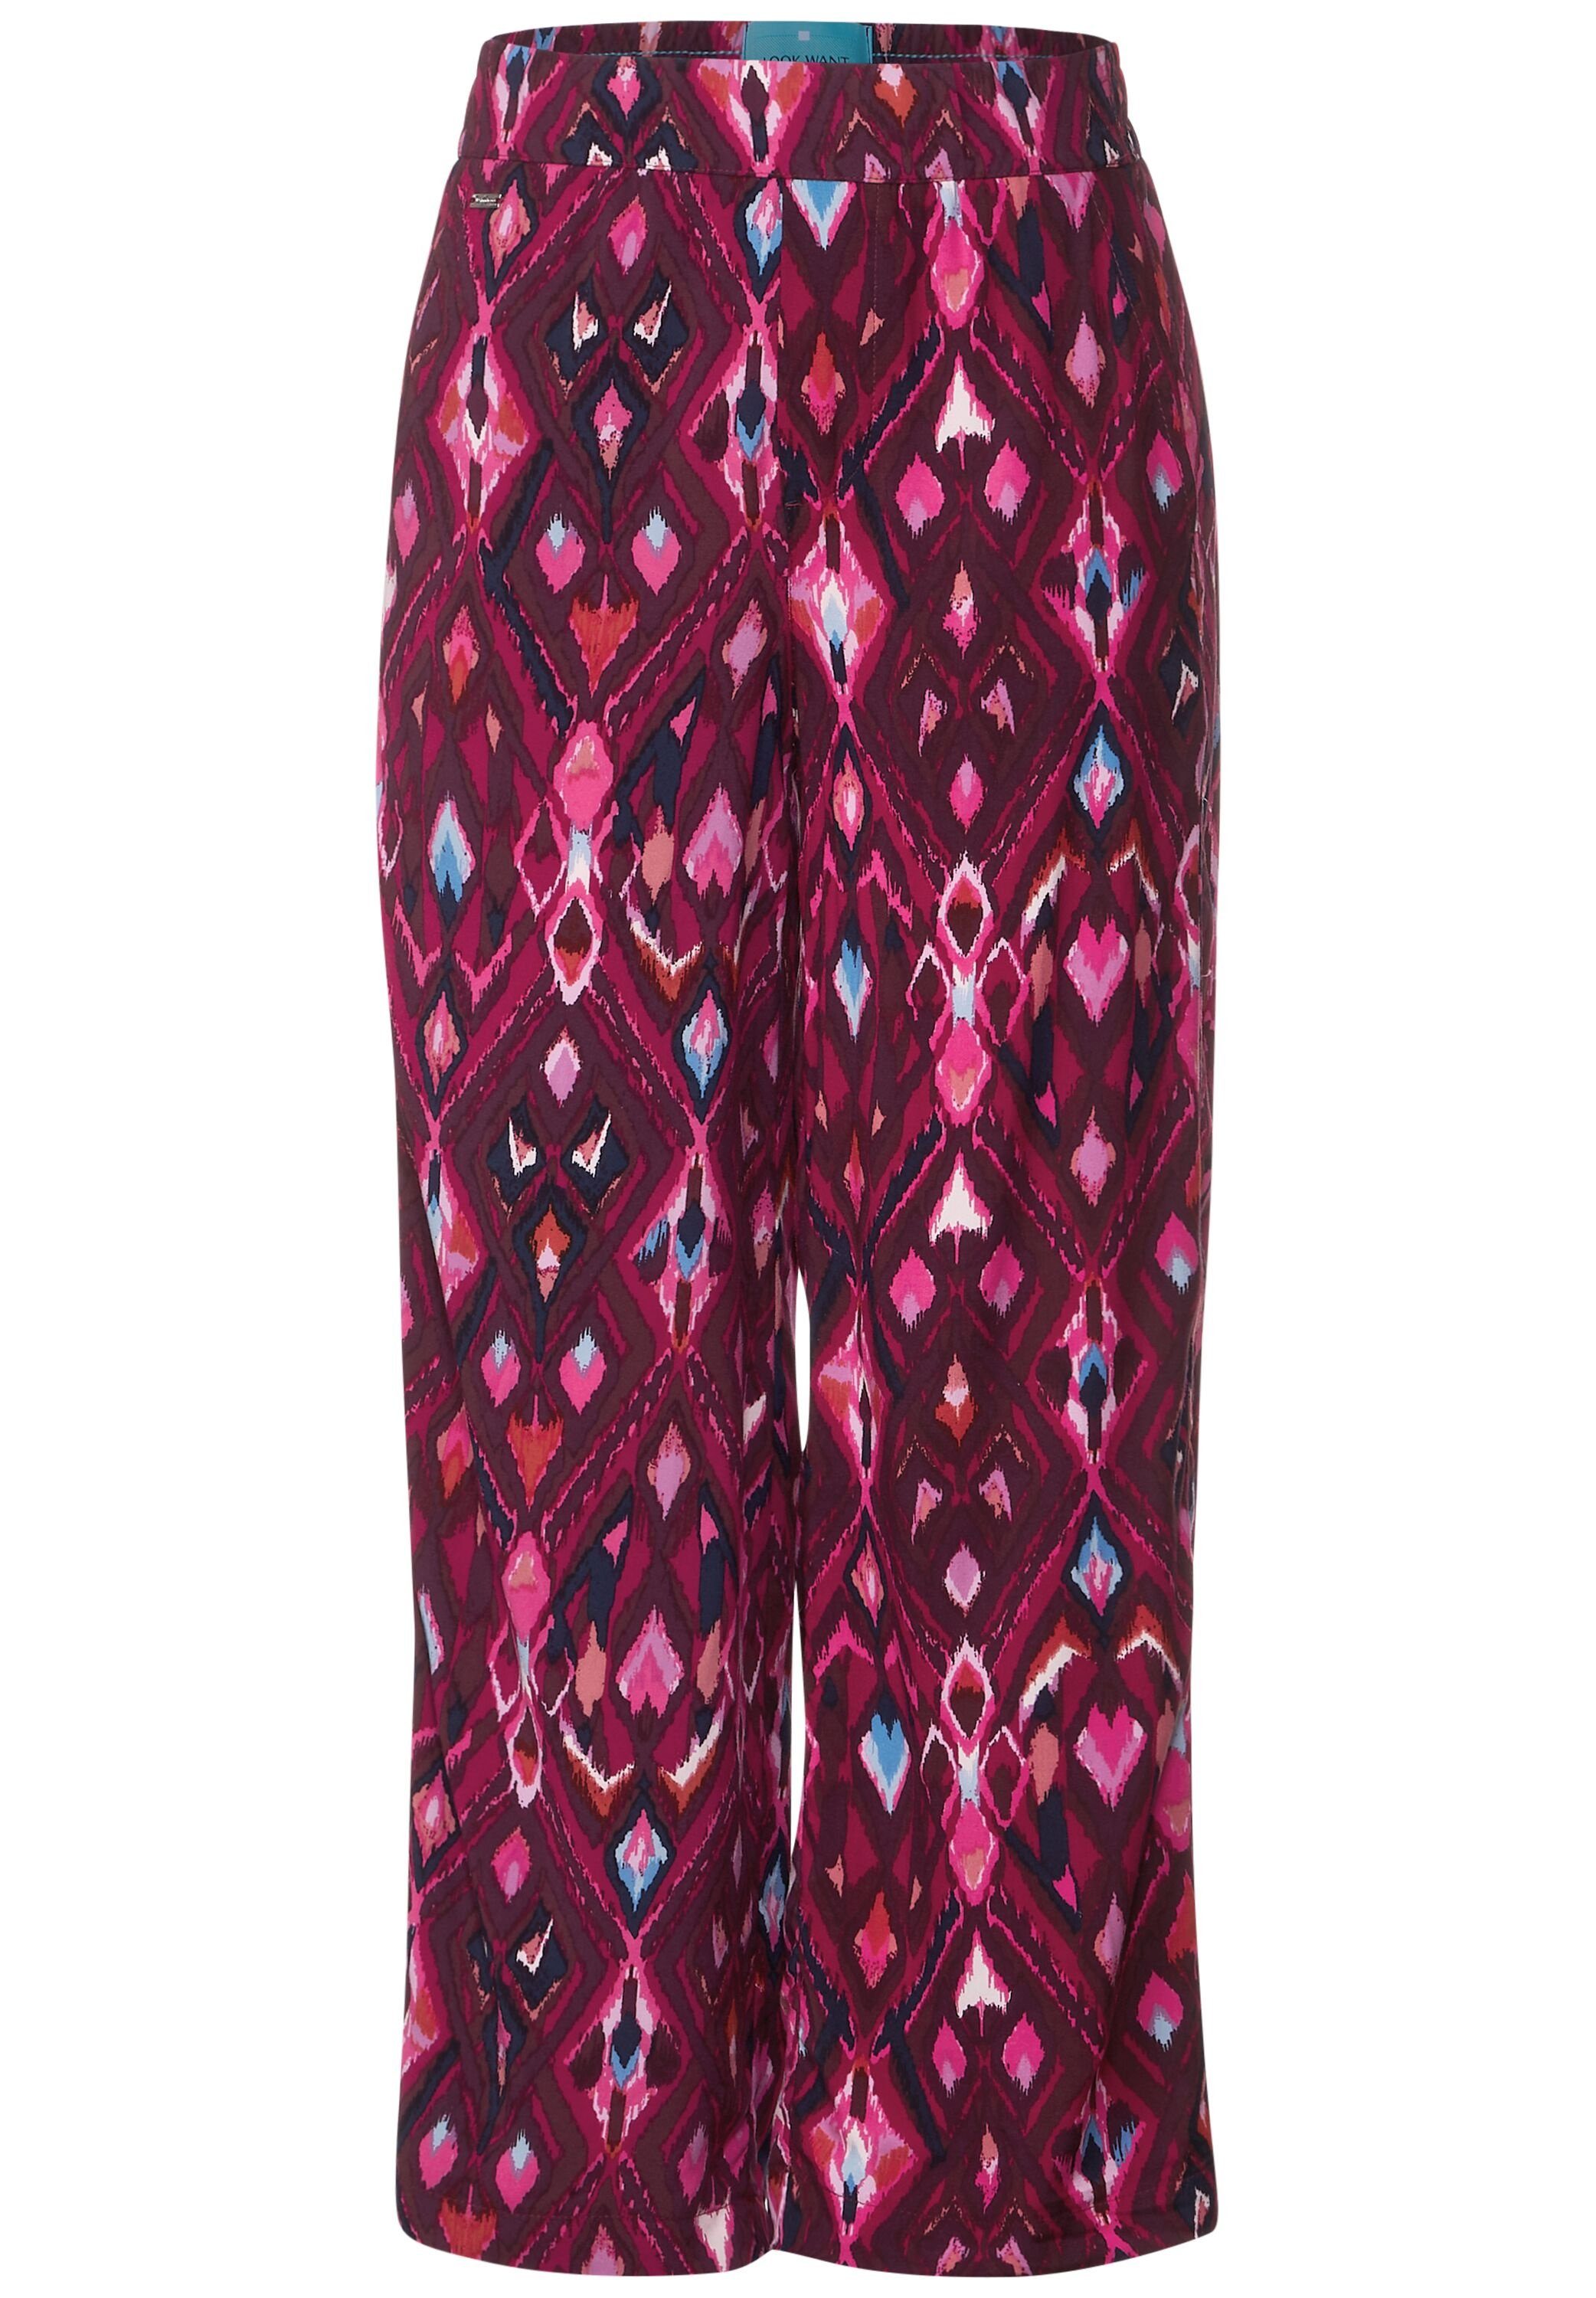 STREET ONE Stoffhose mit Fit Loose Ikatprint tamed berry Hose